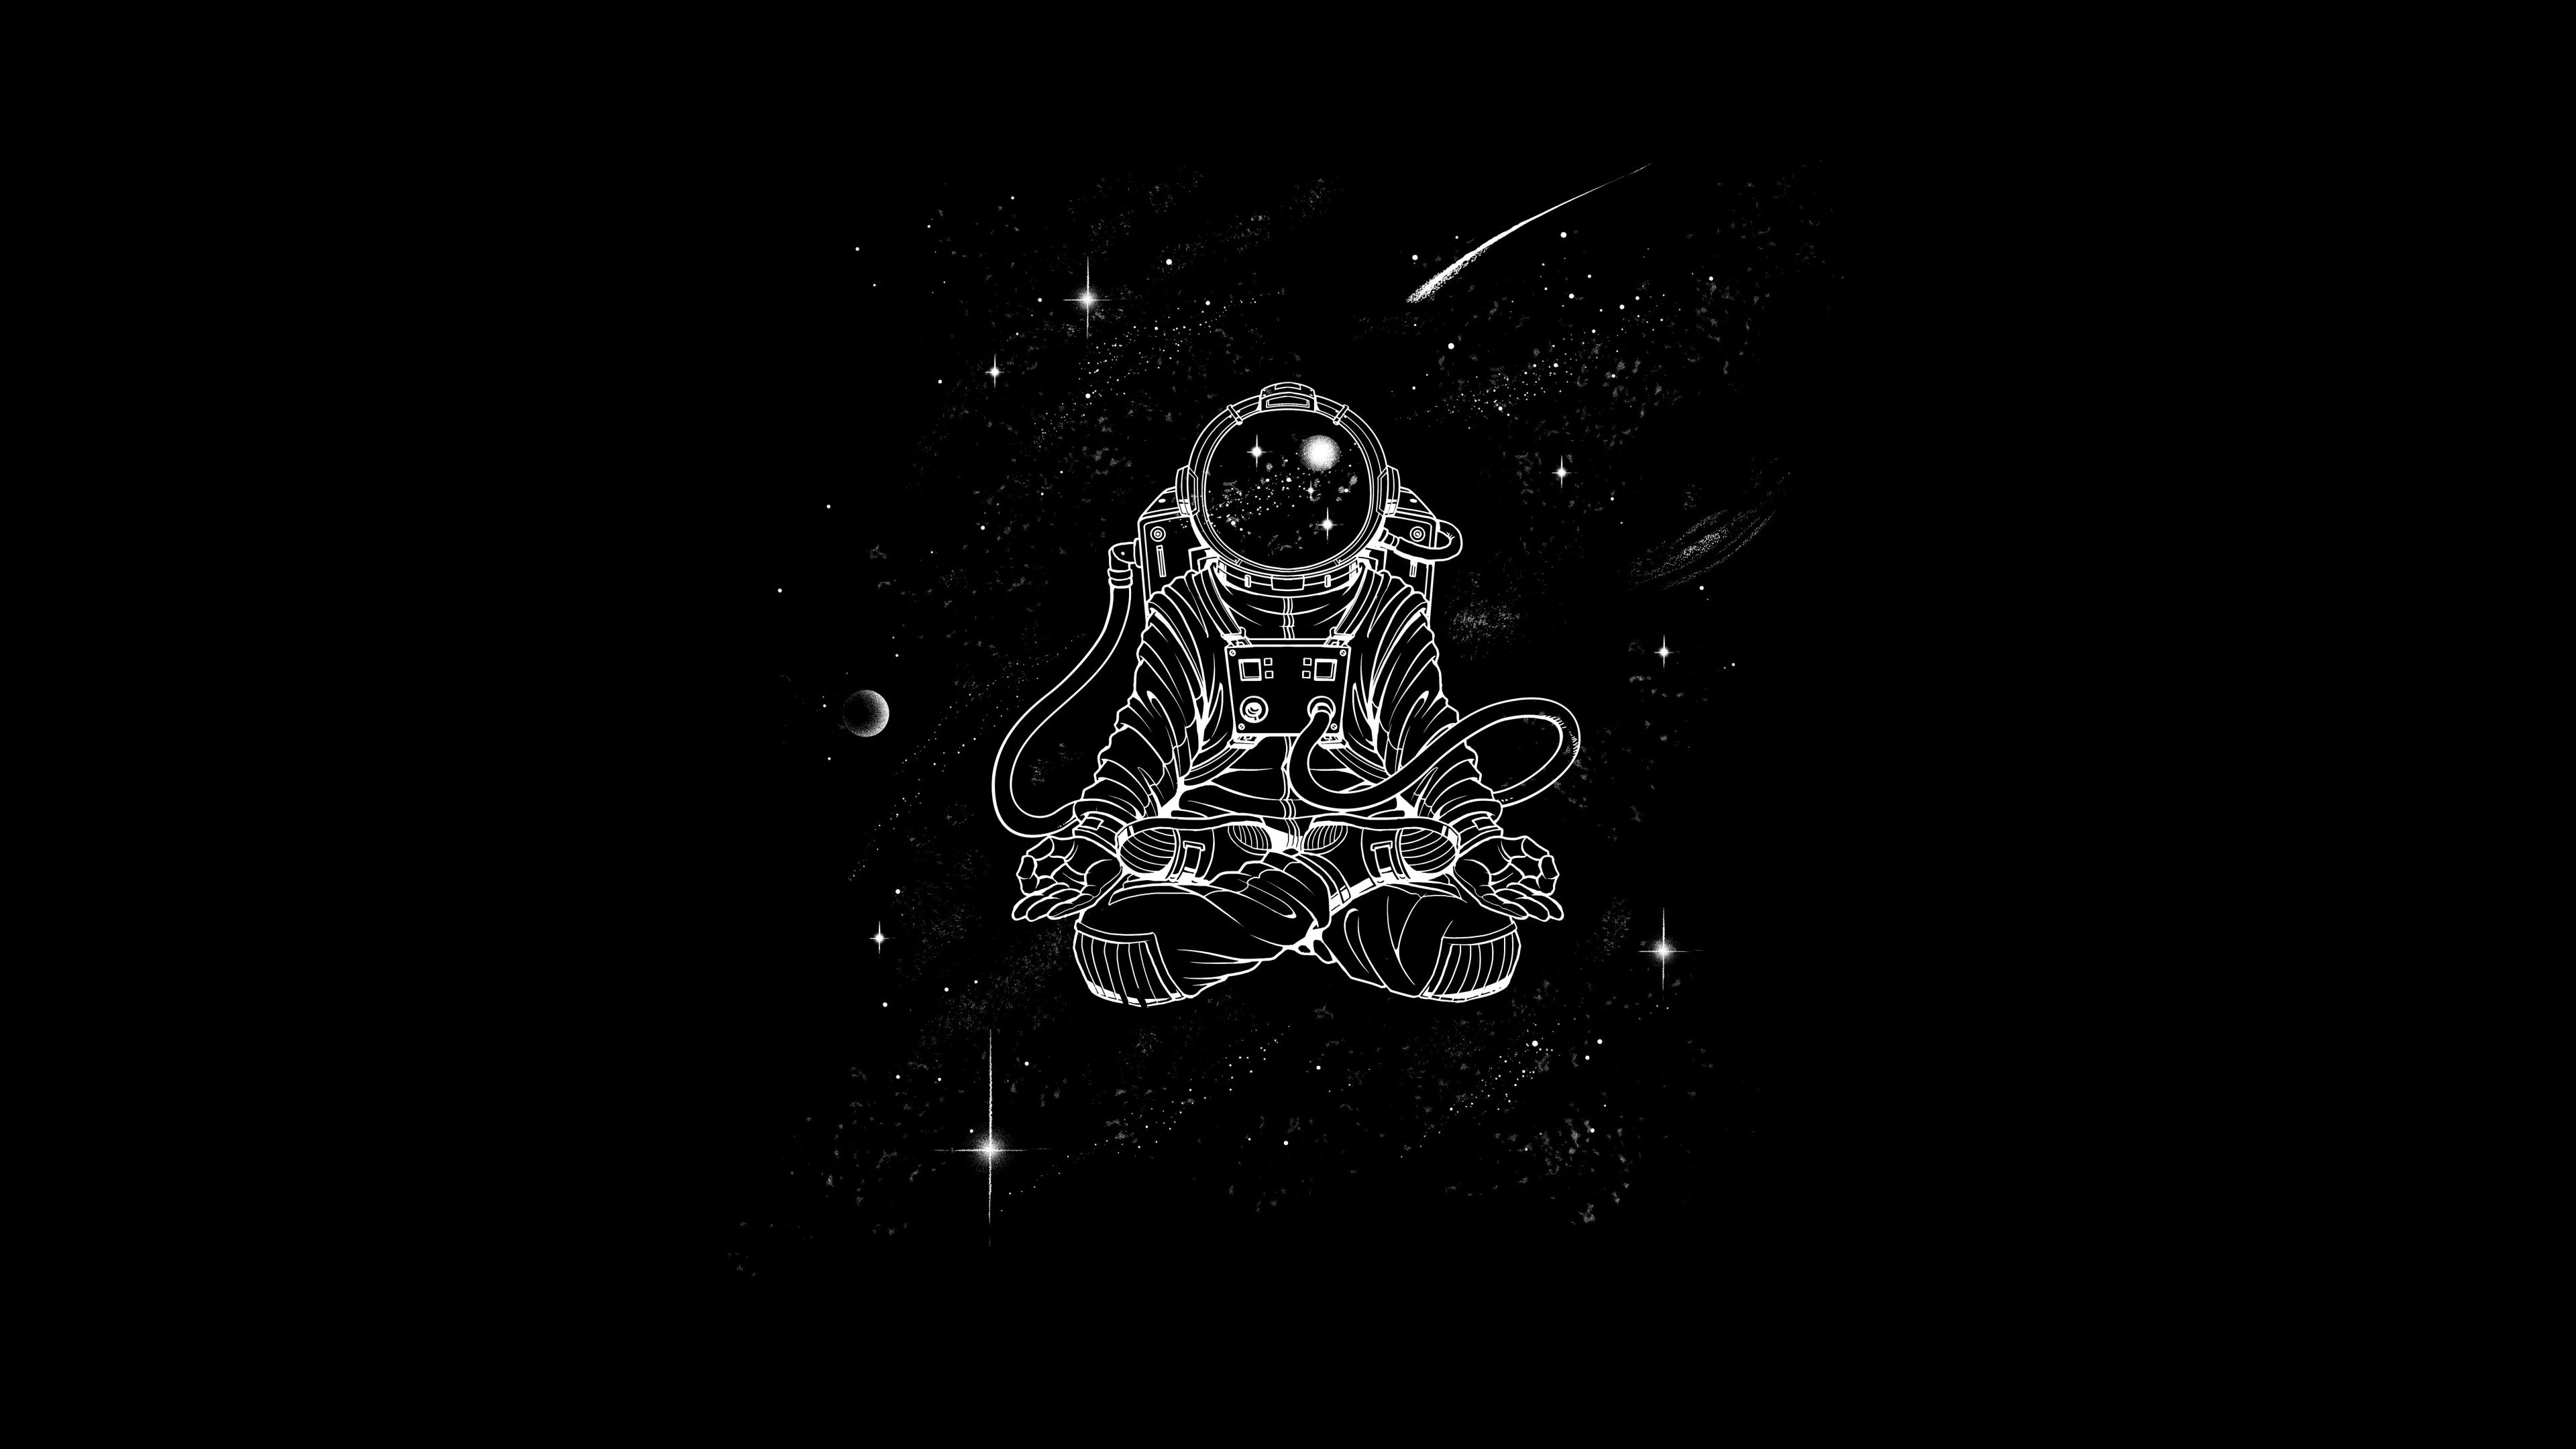 A black and white image of an astronaut in space - Space, black quotes, black anime